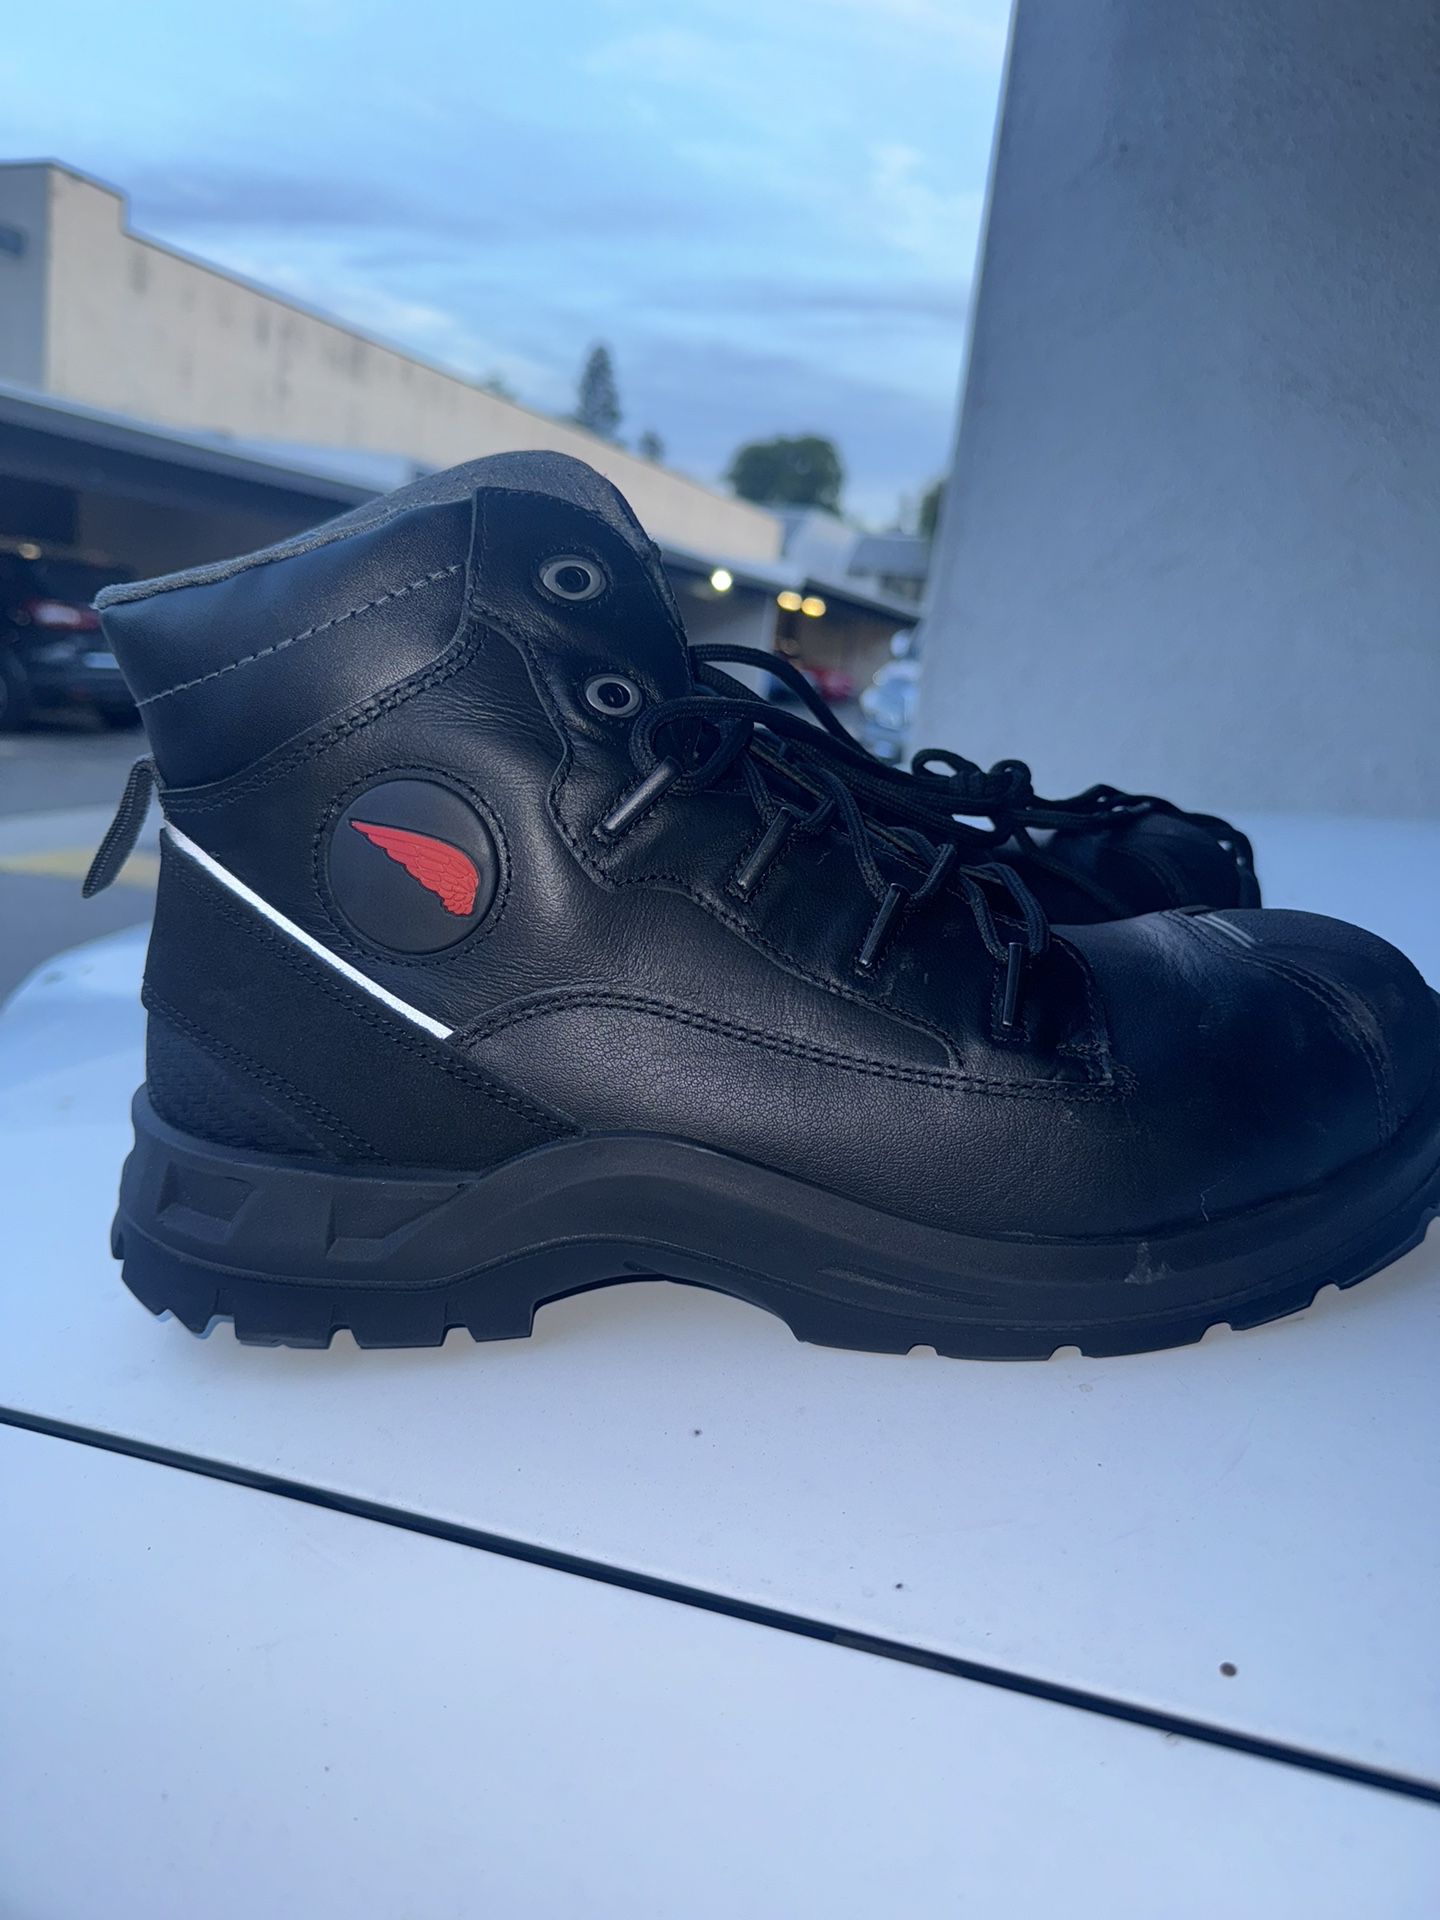 Work Boots Size 13